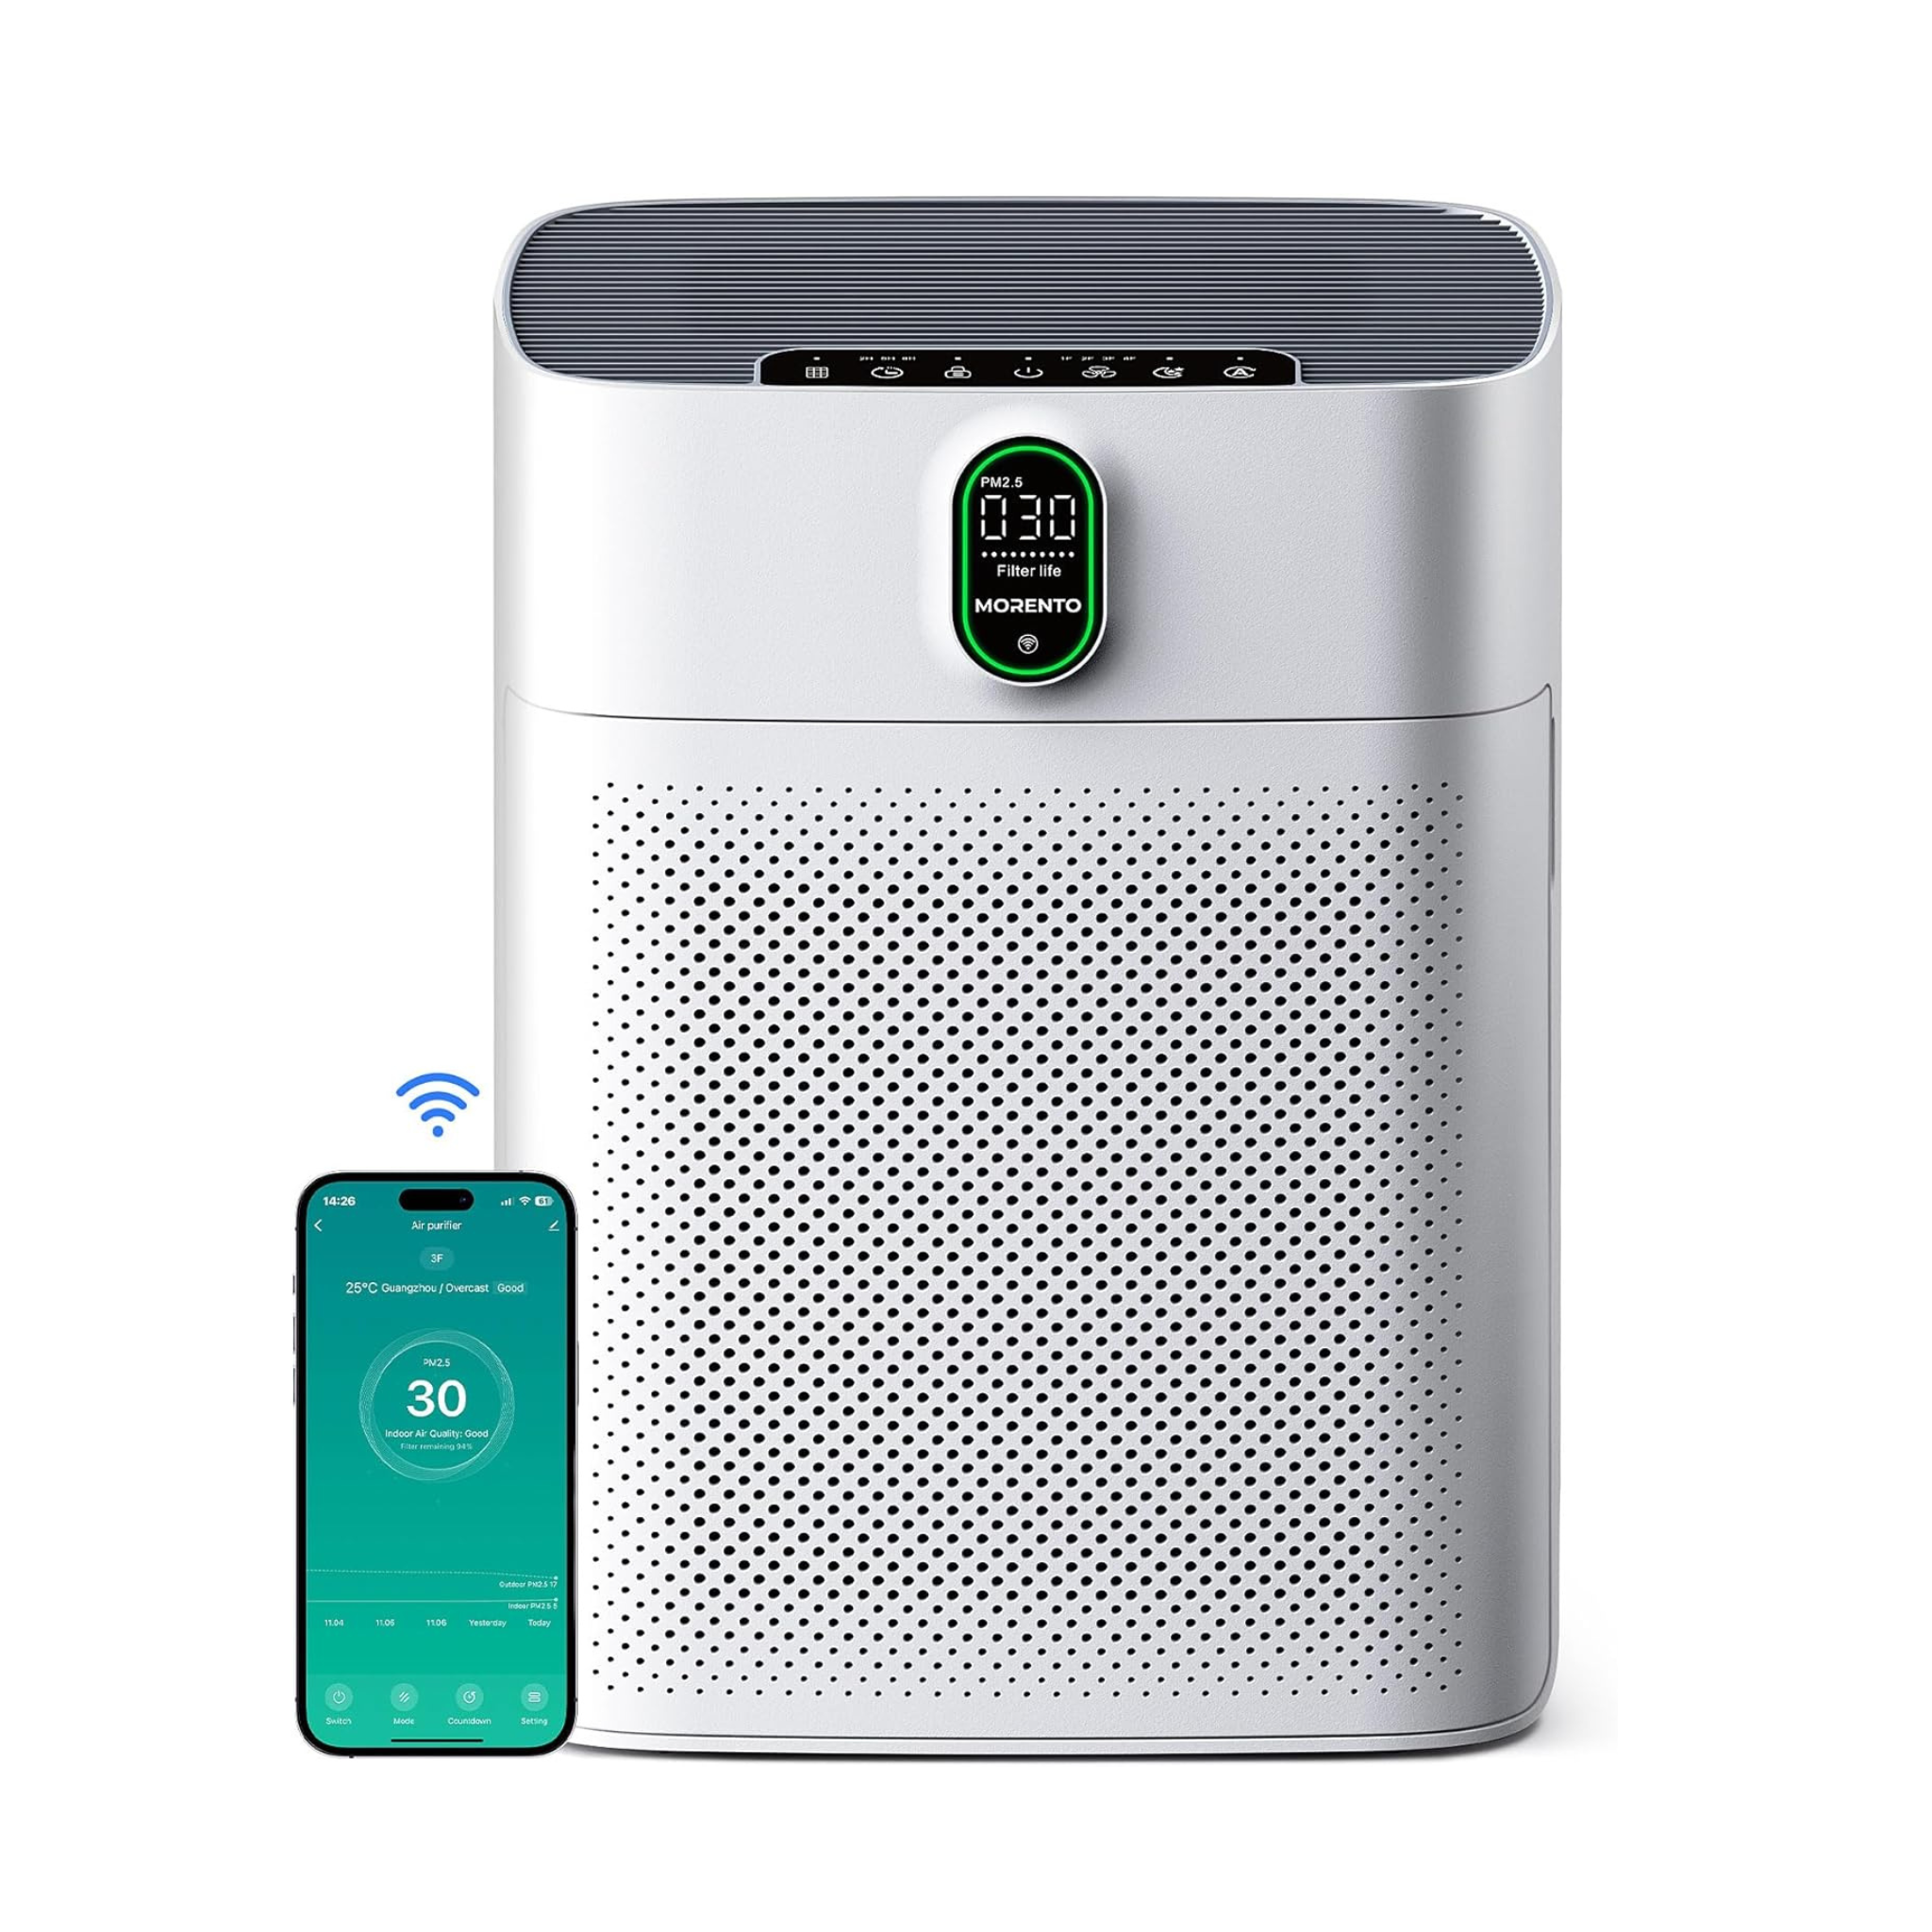 Morento Smart Hepa Air Purifier For Large Rooms up to 1076 ft